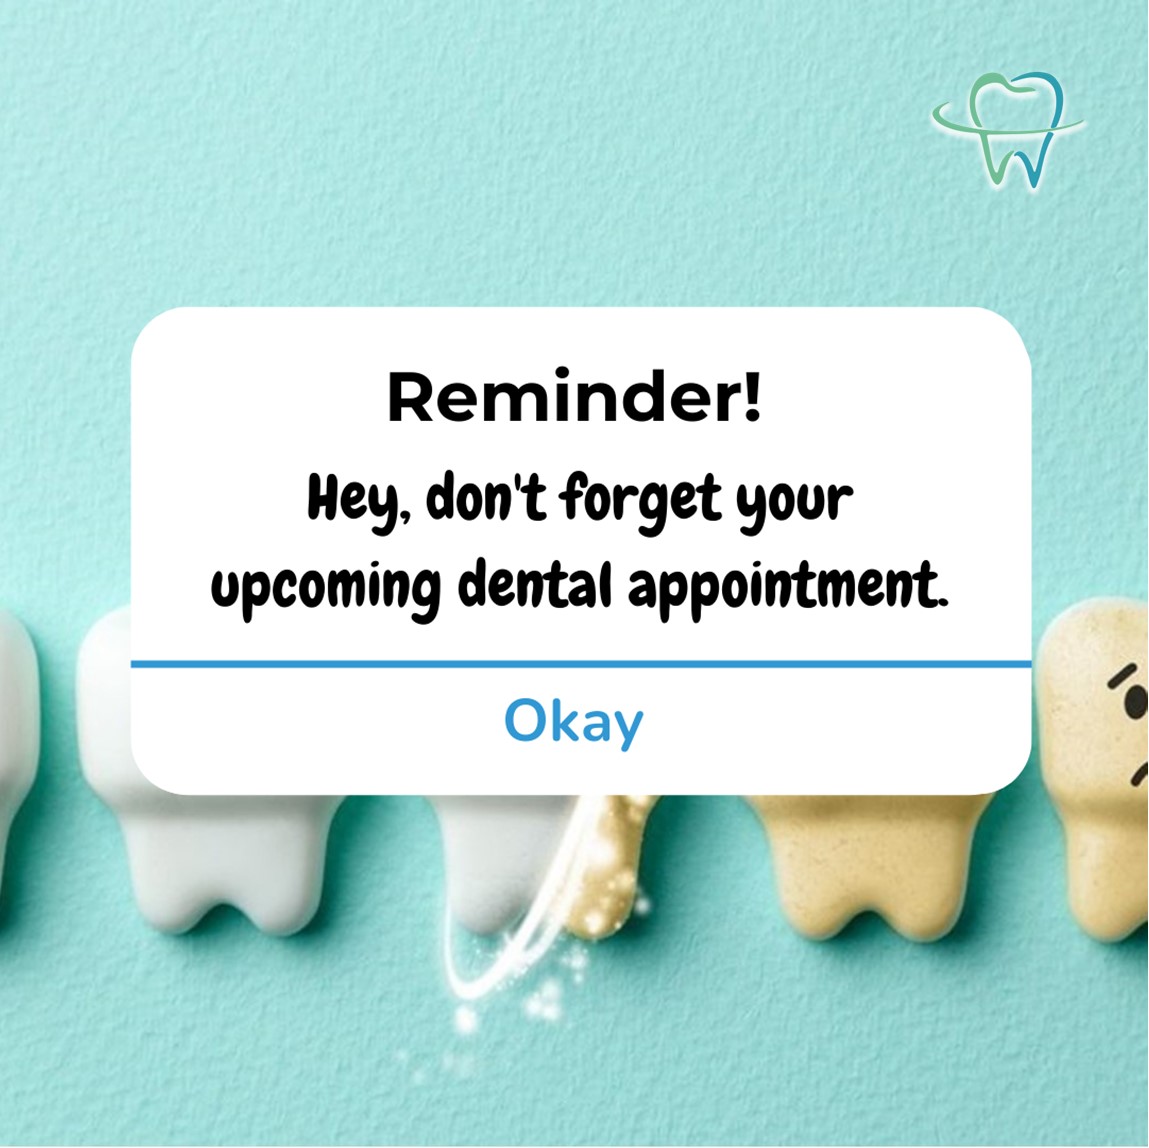 New Month Alert….Don’t forget your upcoming dental appointment!

#flossdental #thetoothdr #flossboss #dentalappointment #dentalreminder
#dentist #dentistry #oralhygiene #trinidadandtobago